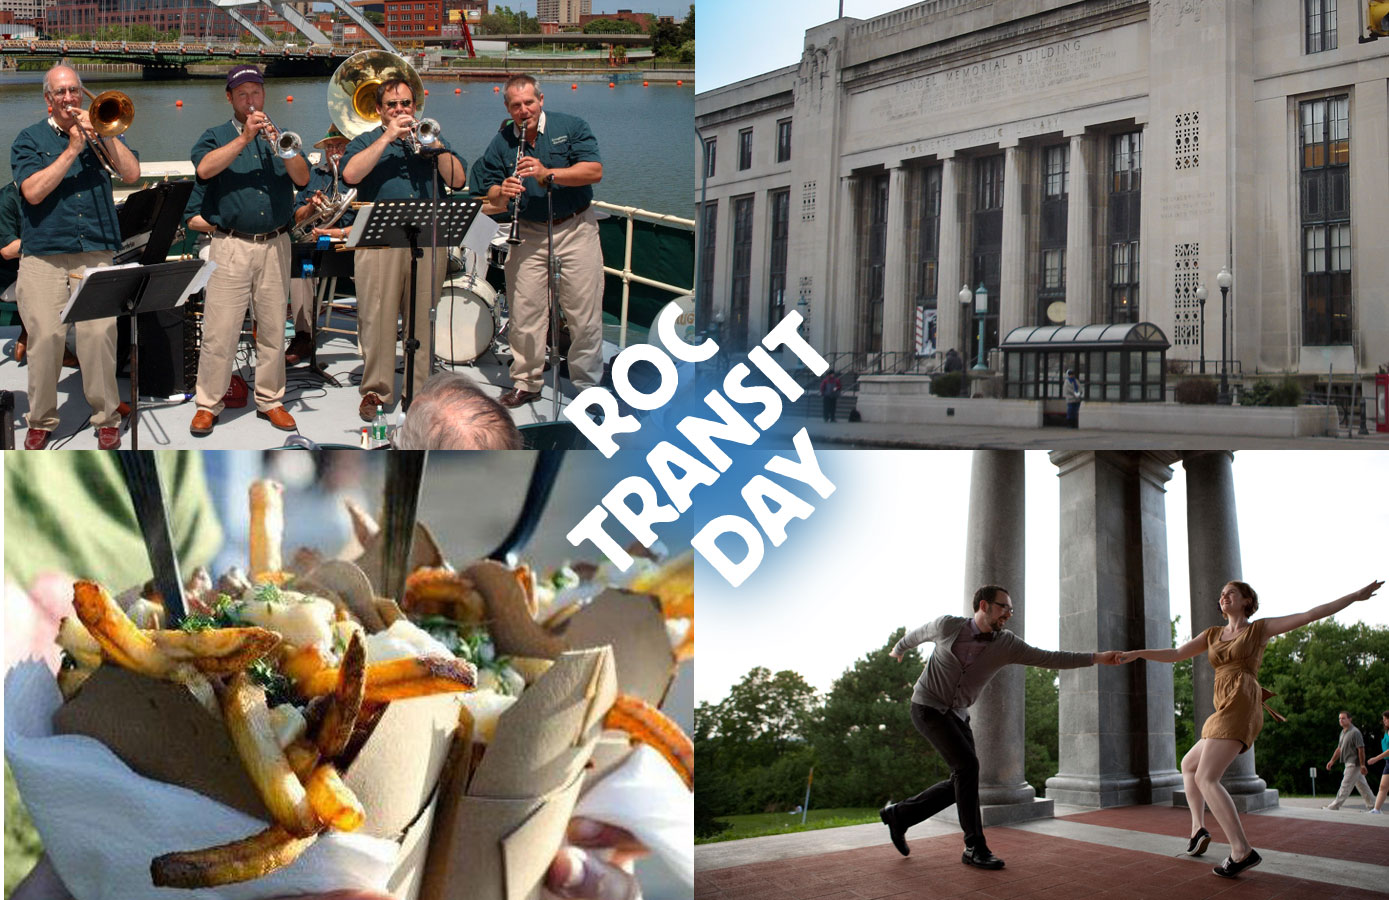 ROC Transit Day is more than just a bus ride... you get to bask in the Rochester funshine.